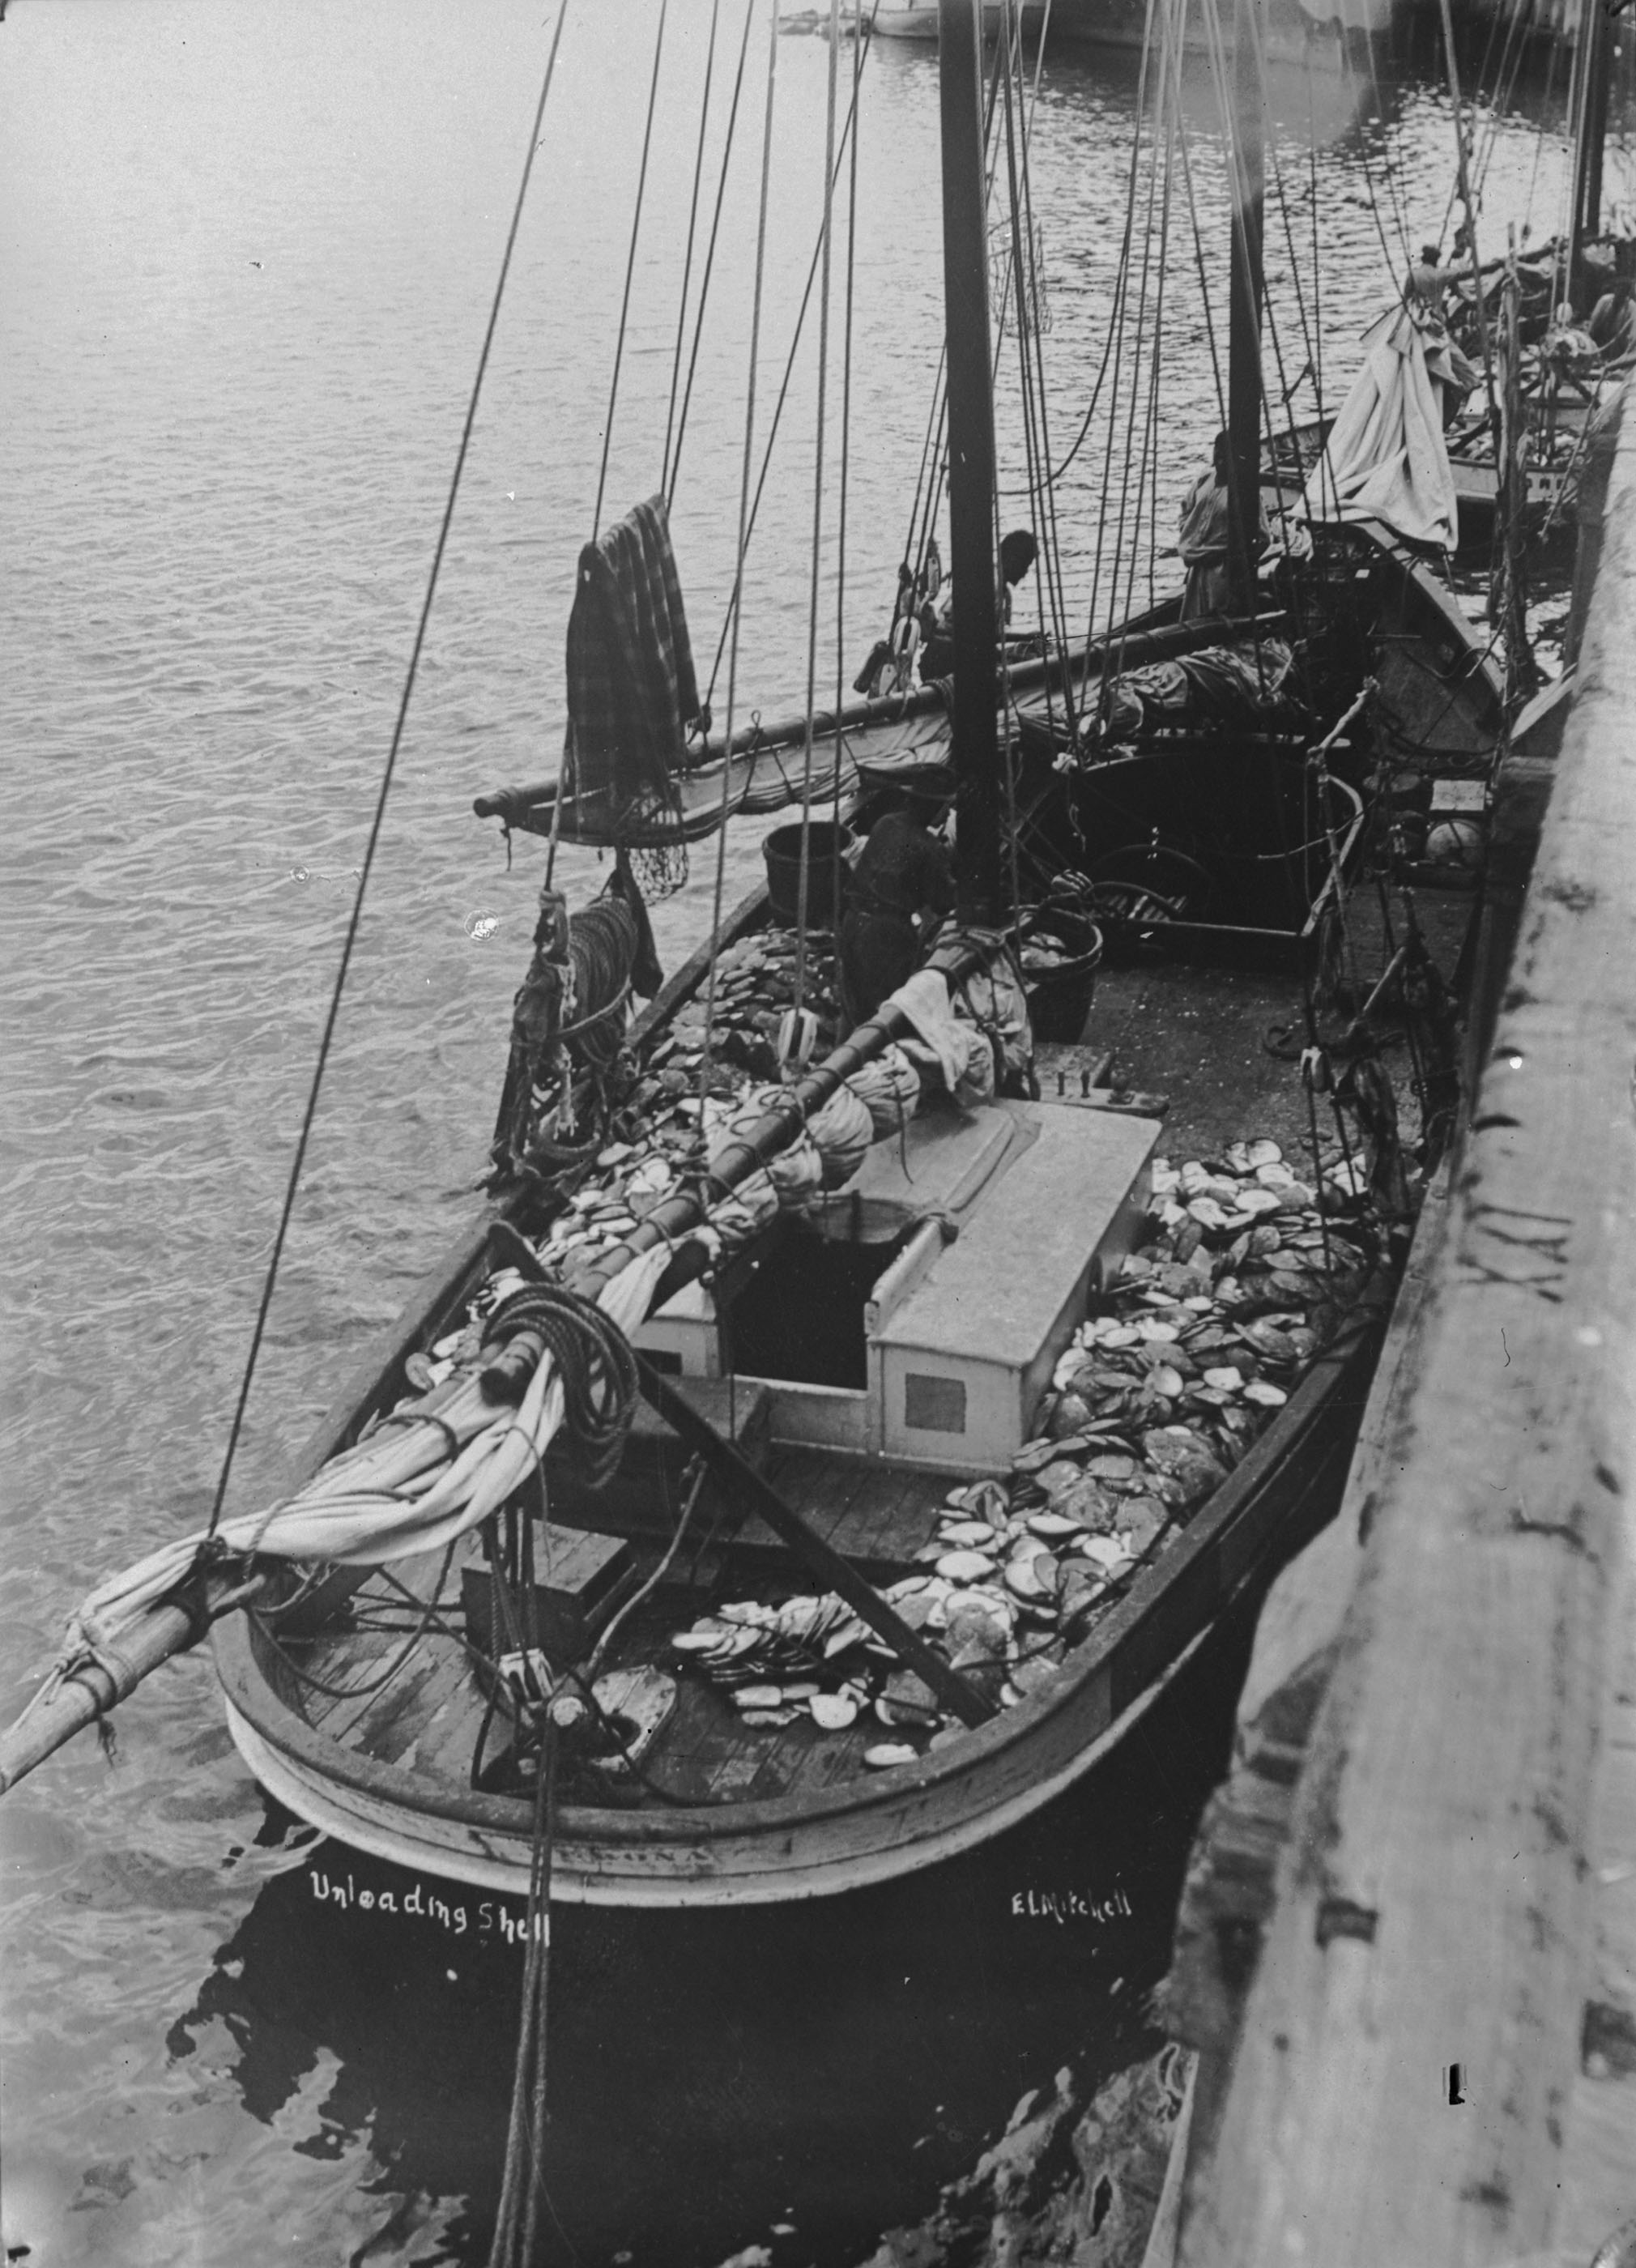 Unloading pearl shell from a lugger, 1910.